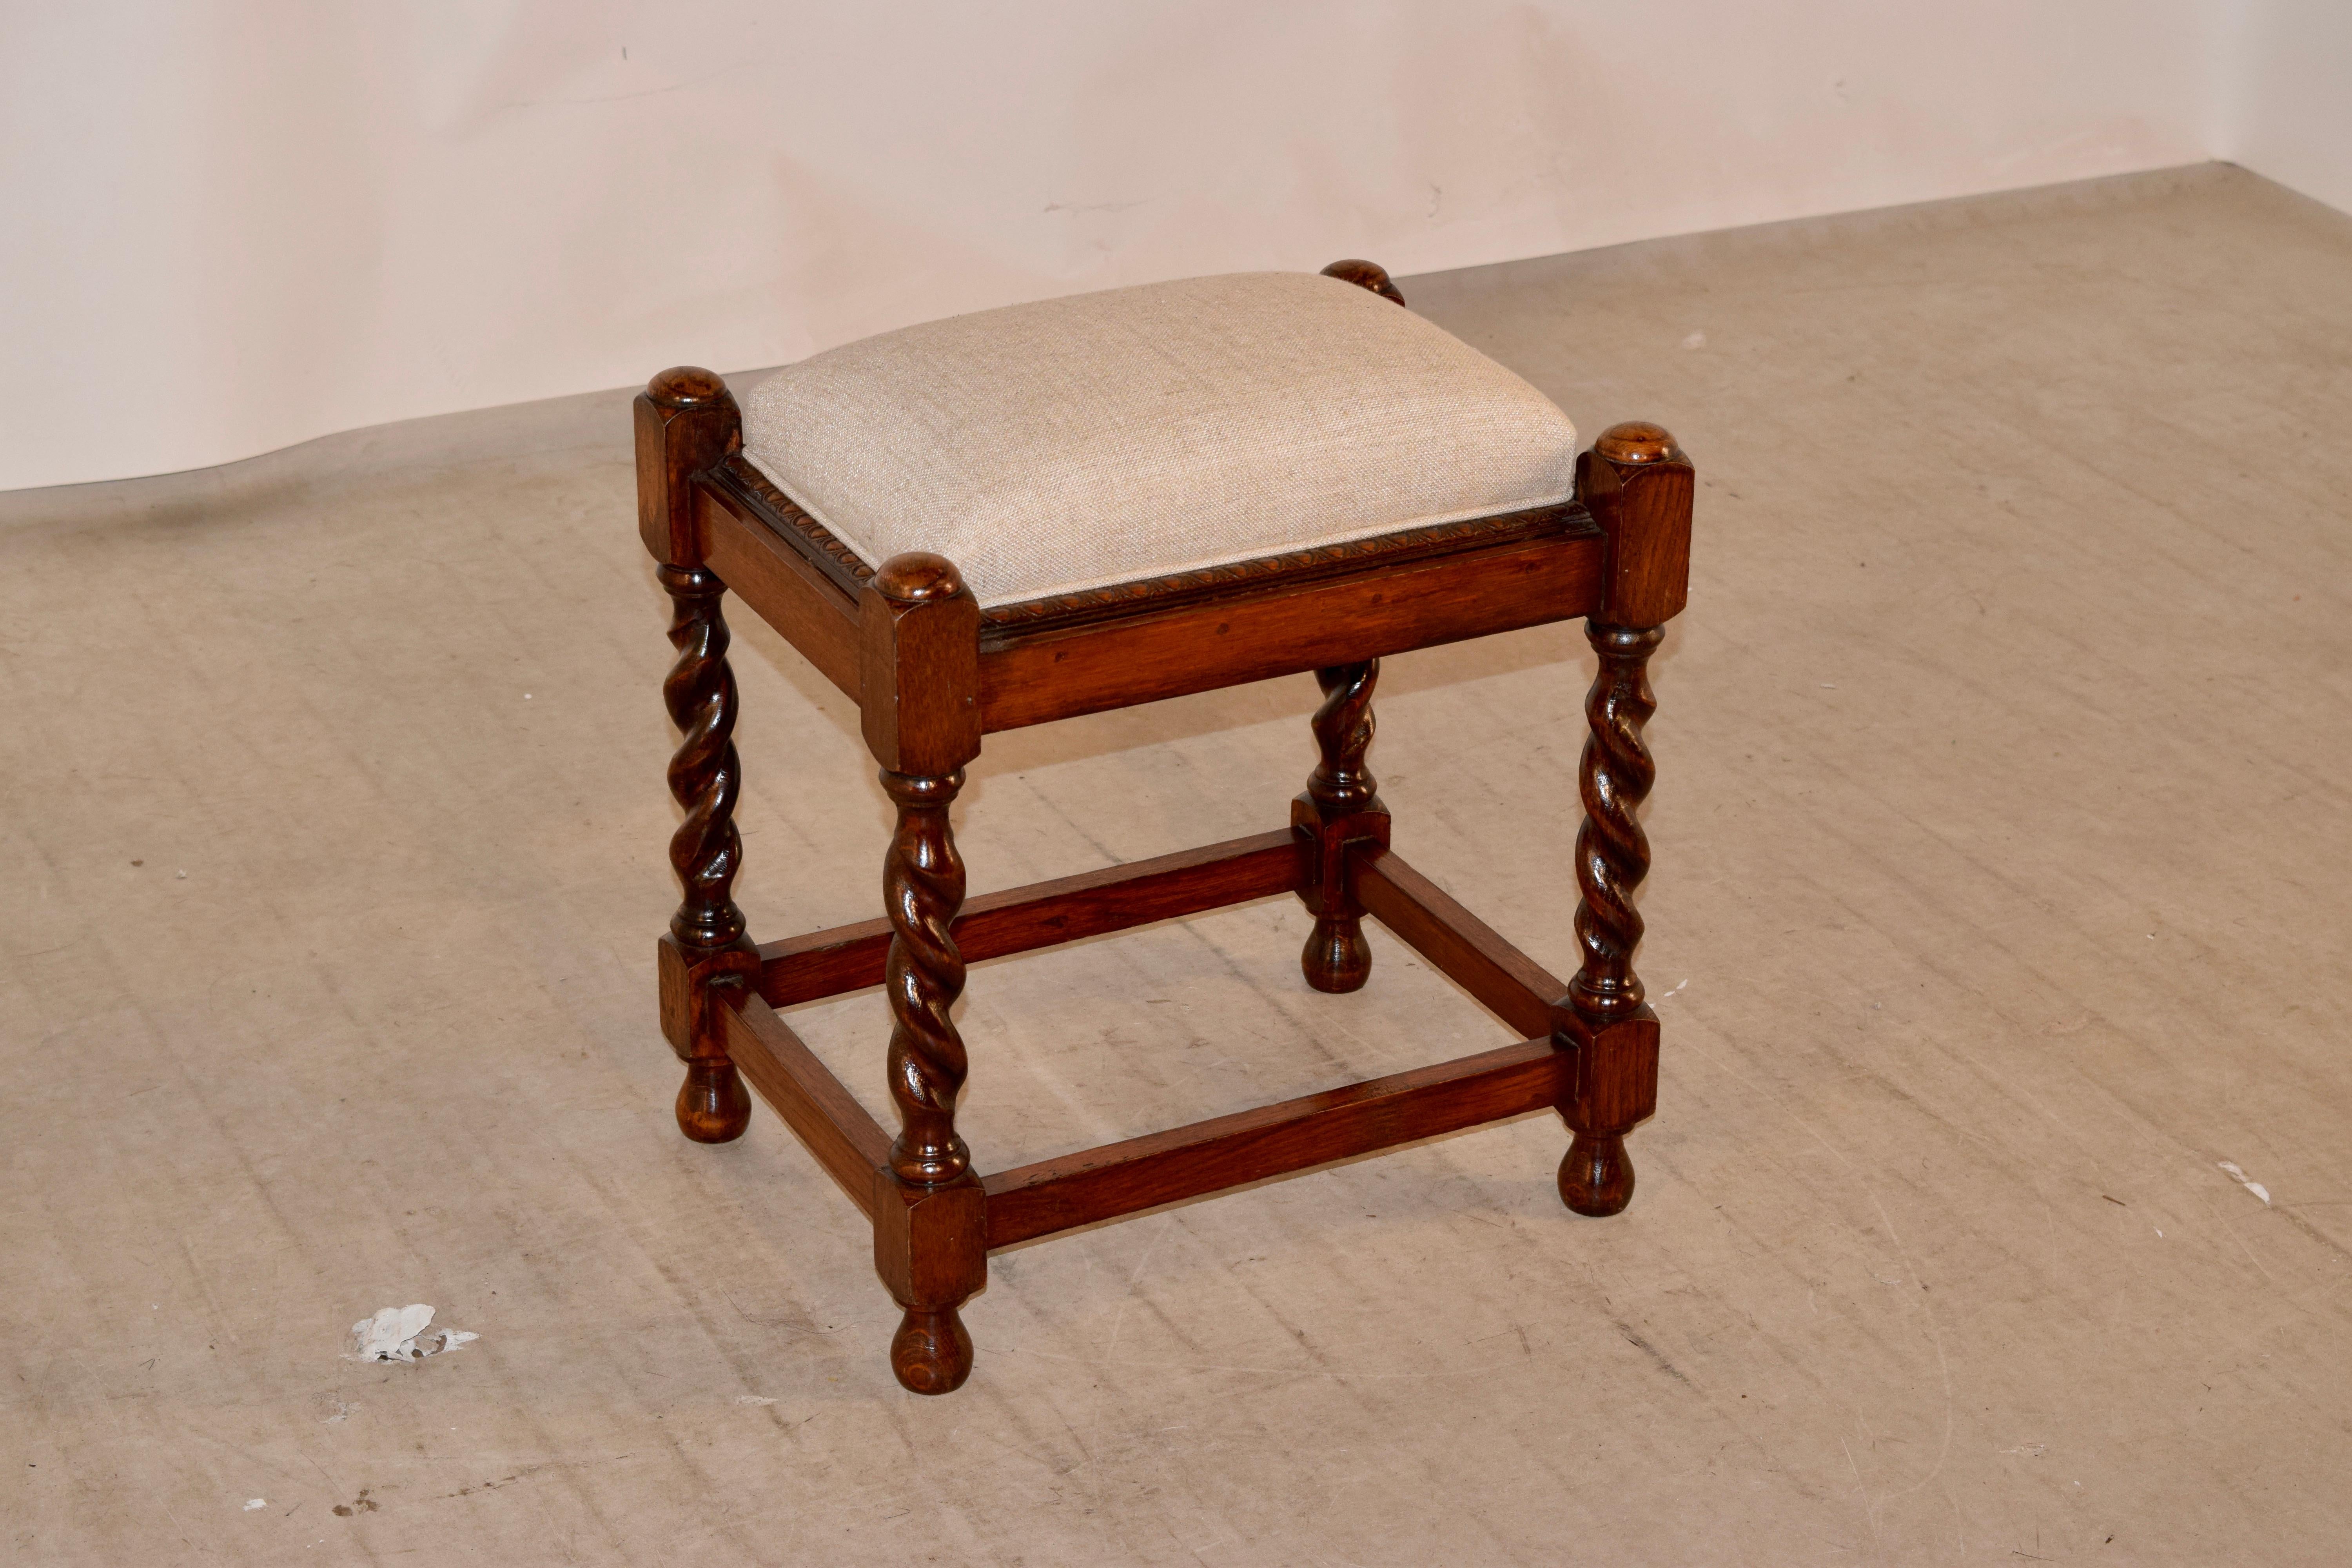 19th century oak stool from England wit newly upholstered linen seat. There are hand turned caps at the top following down to hand turned barley twist legs, joined by simple stretchers and supported on hand turned feet. Lovely form.